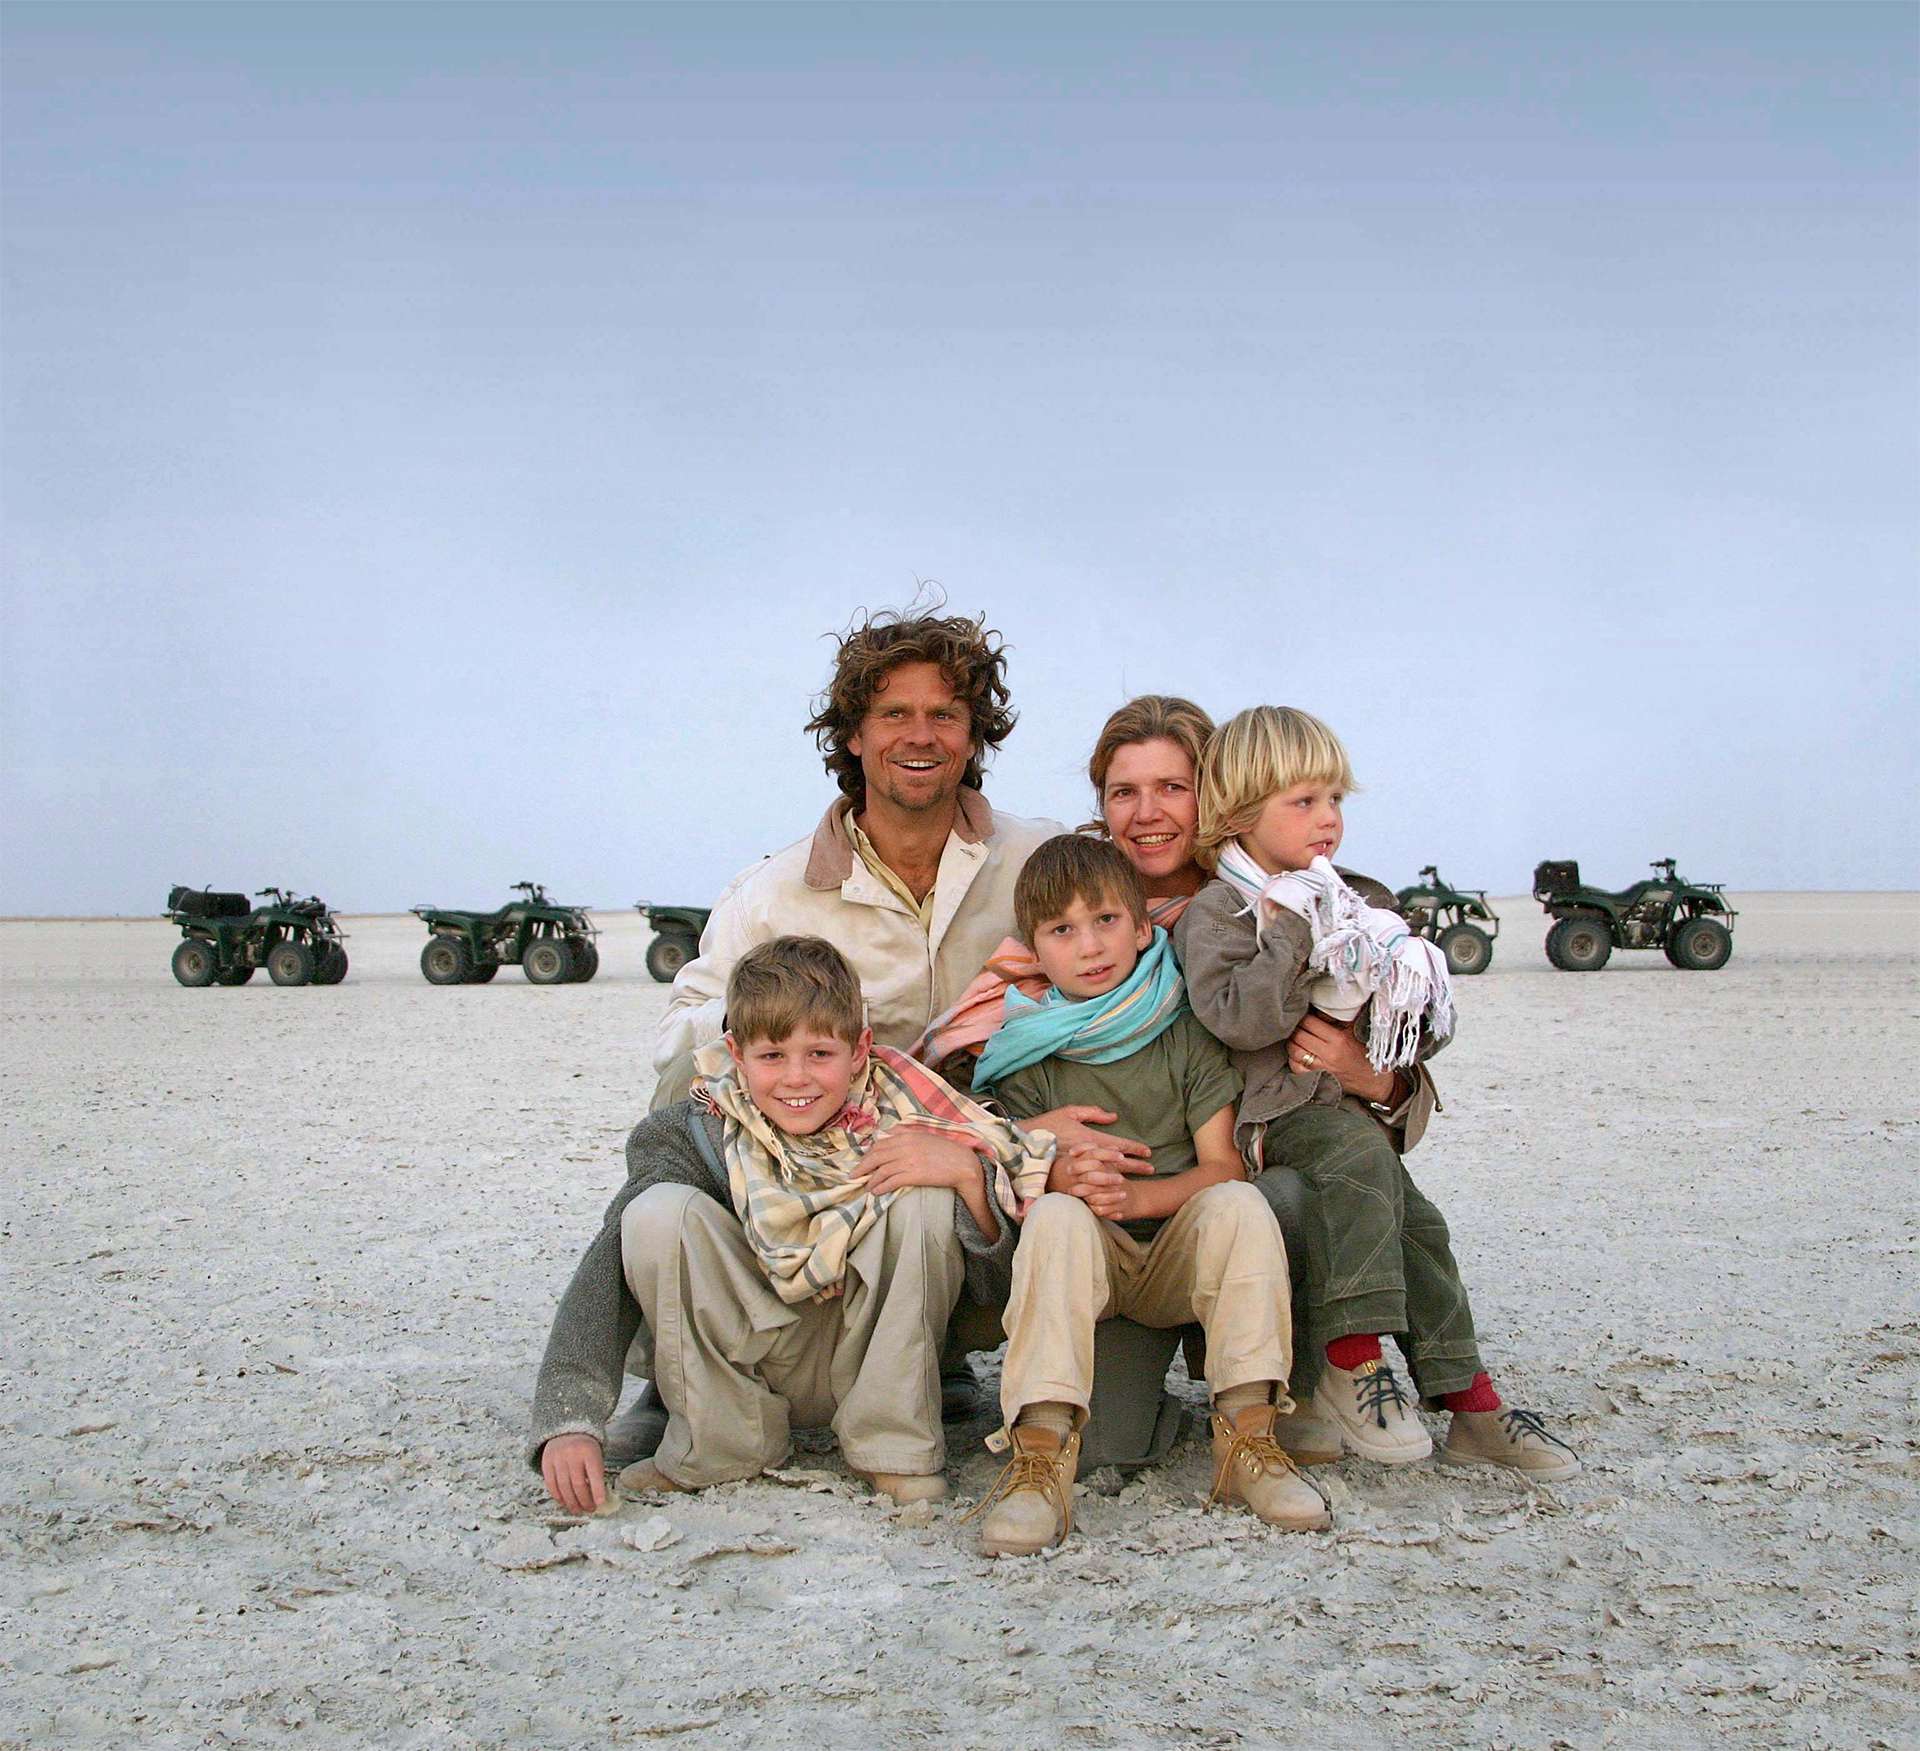 After a transfer by private helicopter to the eastern side of the Kalahari, this family set out on quad bikes to explore Botswana’s Makgadikgadi Pans.